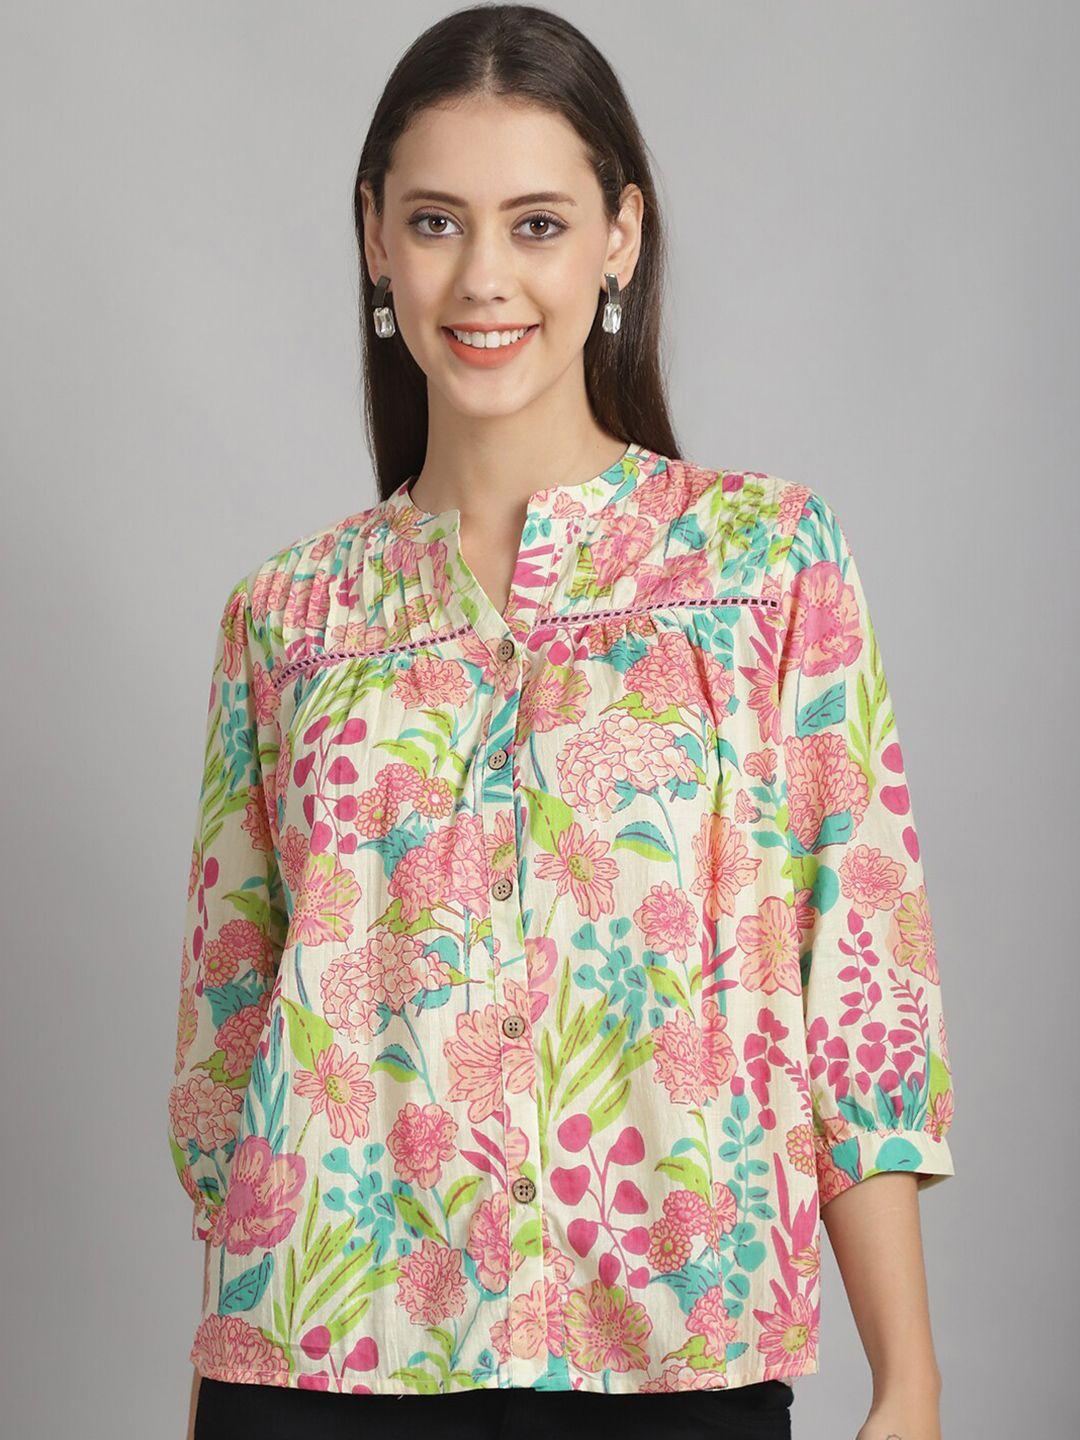 frempy-floral-printed-mandarin-collar-cuffed-sleeves-pure-cotton-top